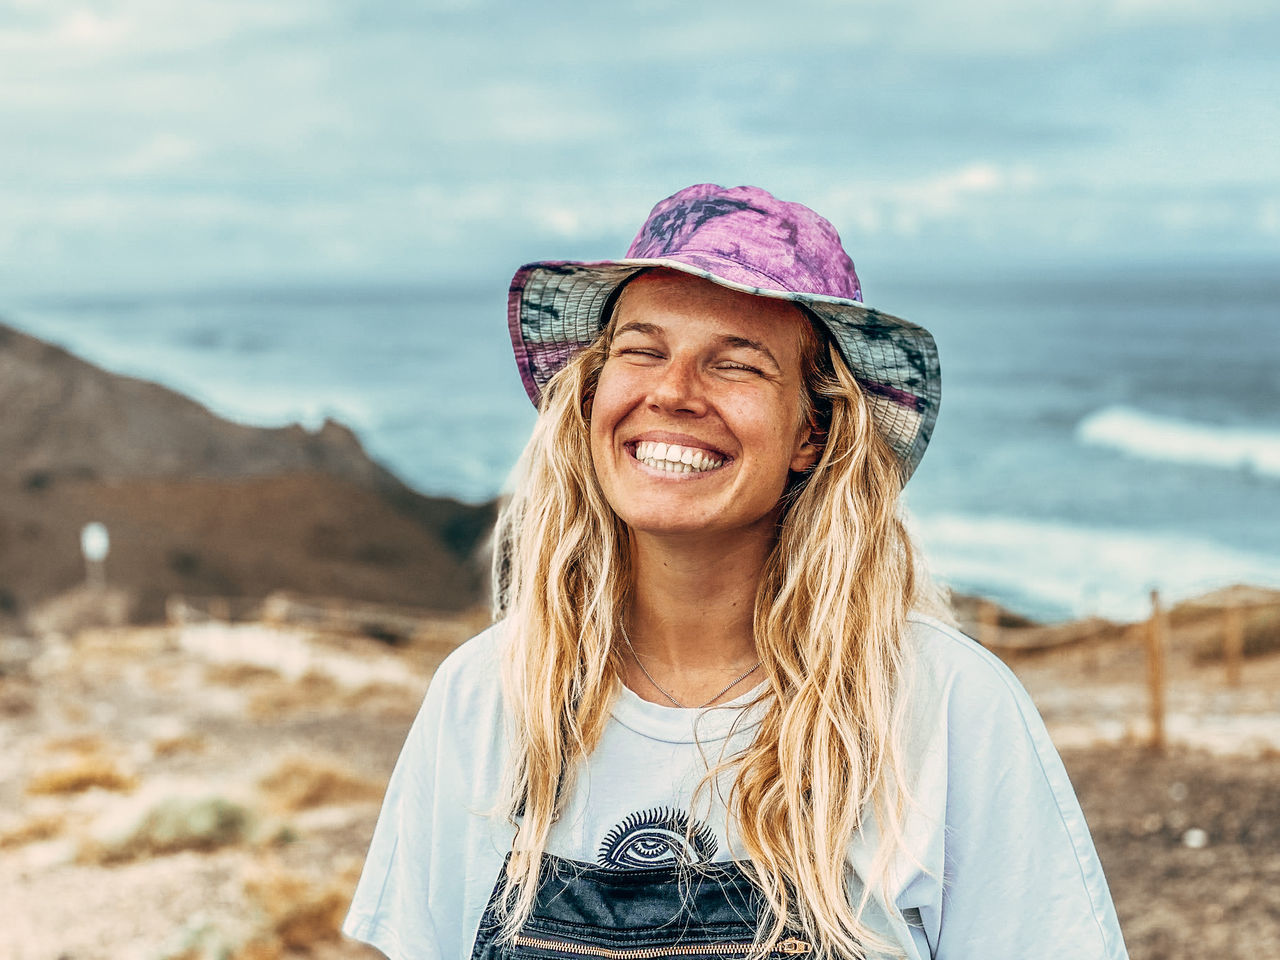 one person, smiling, portrait, happiness, land, adult, women, spring, long hair, beach, hat, emotion, nature, blond hair, clothing, teeth, leisure activity, hairstyle, smile, water, sea, trip, vacation, holiday, cheerful, young adult, blue, front view, sky, casual clothing, female, day, portrait photography, looking at camera, fashion accessory, enjoyment, focus on foreground, travel, sand, headshot, photo shoot, lifestyles, landscape, standing, outdoors, travel destinations, carefree, fun, waist up, relaxation, environment, positive emotion, summer, looking, person, sun hat, fashion, beauty in nature, rural scene, sunlight